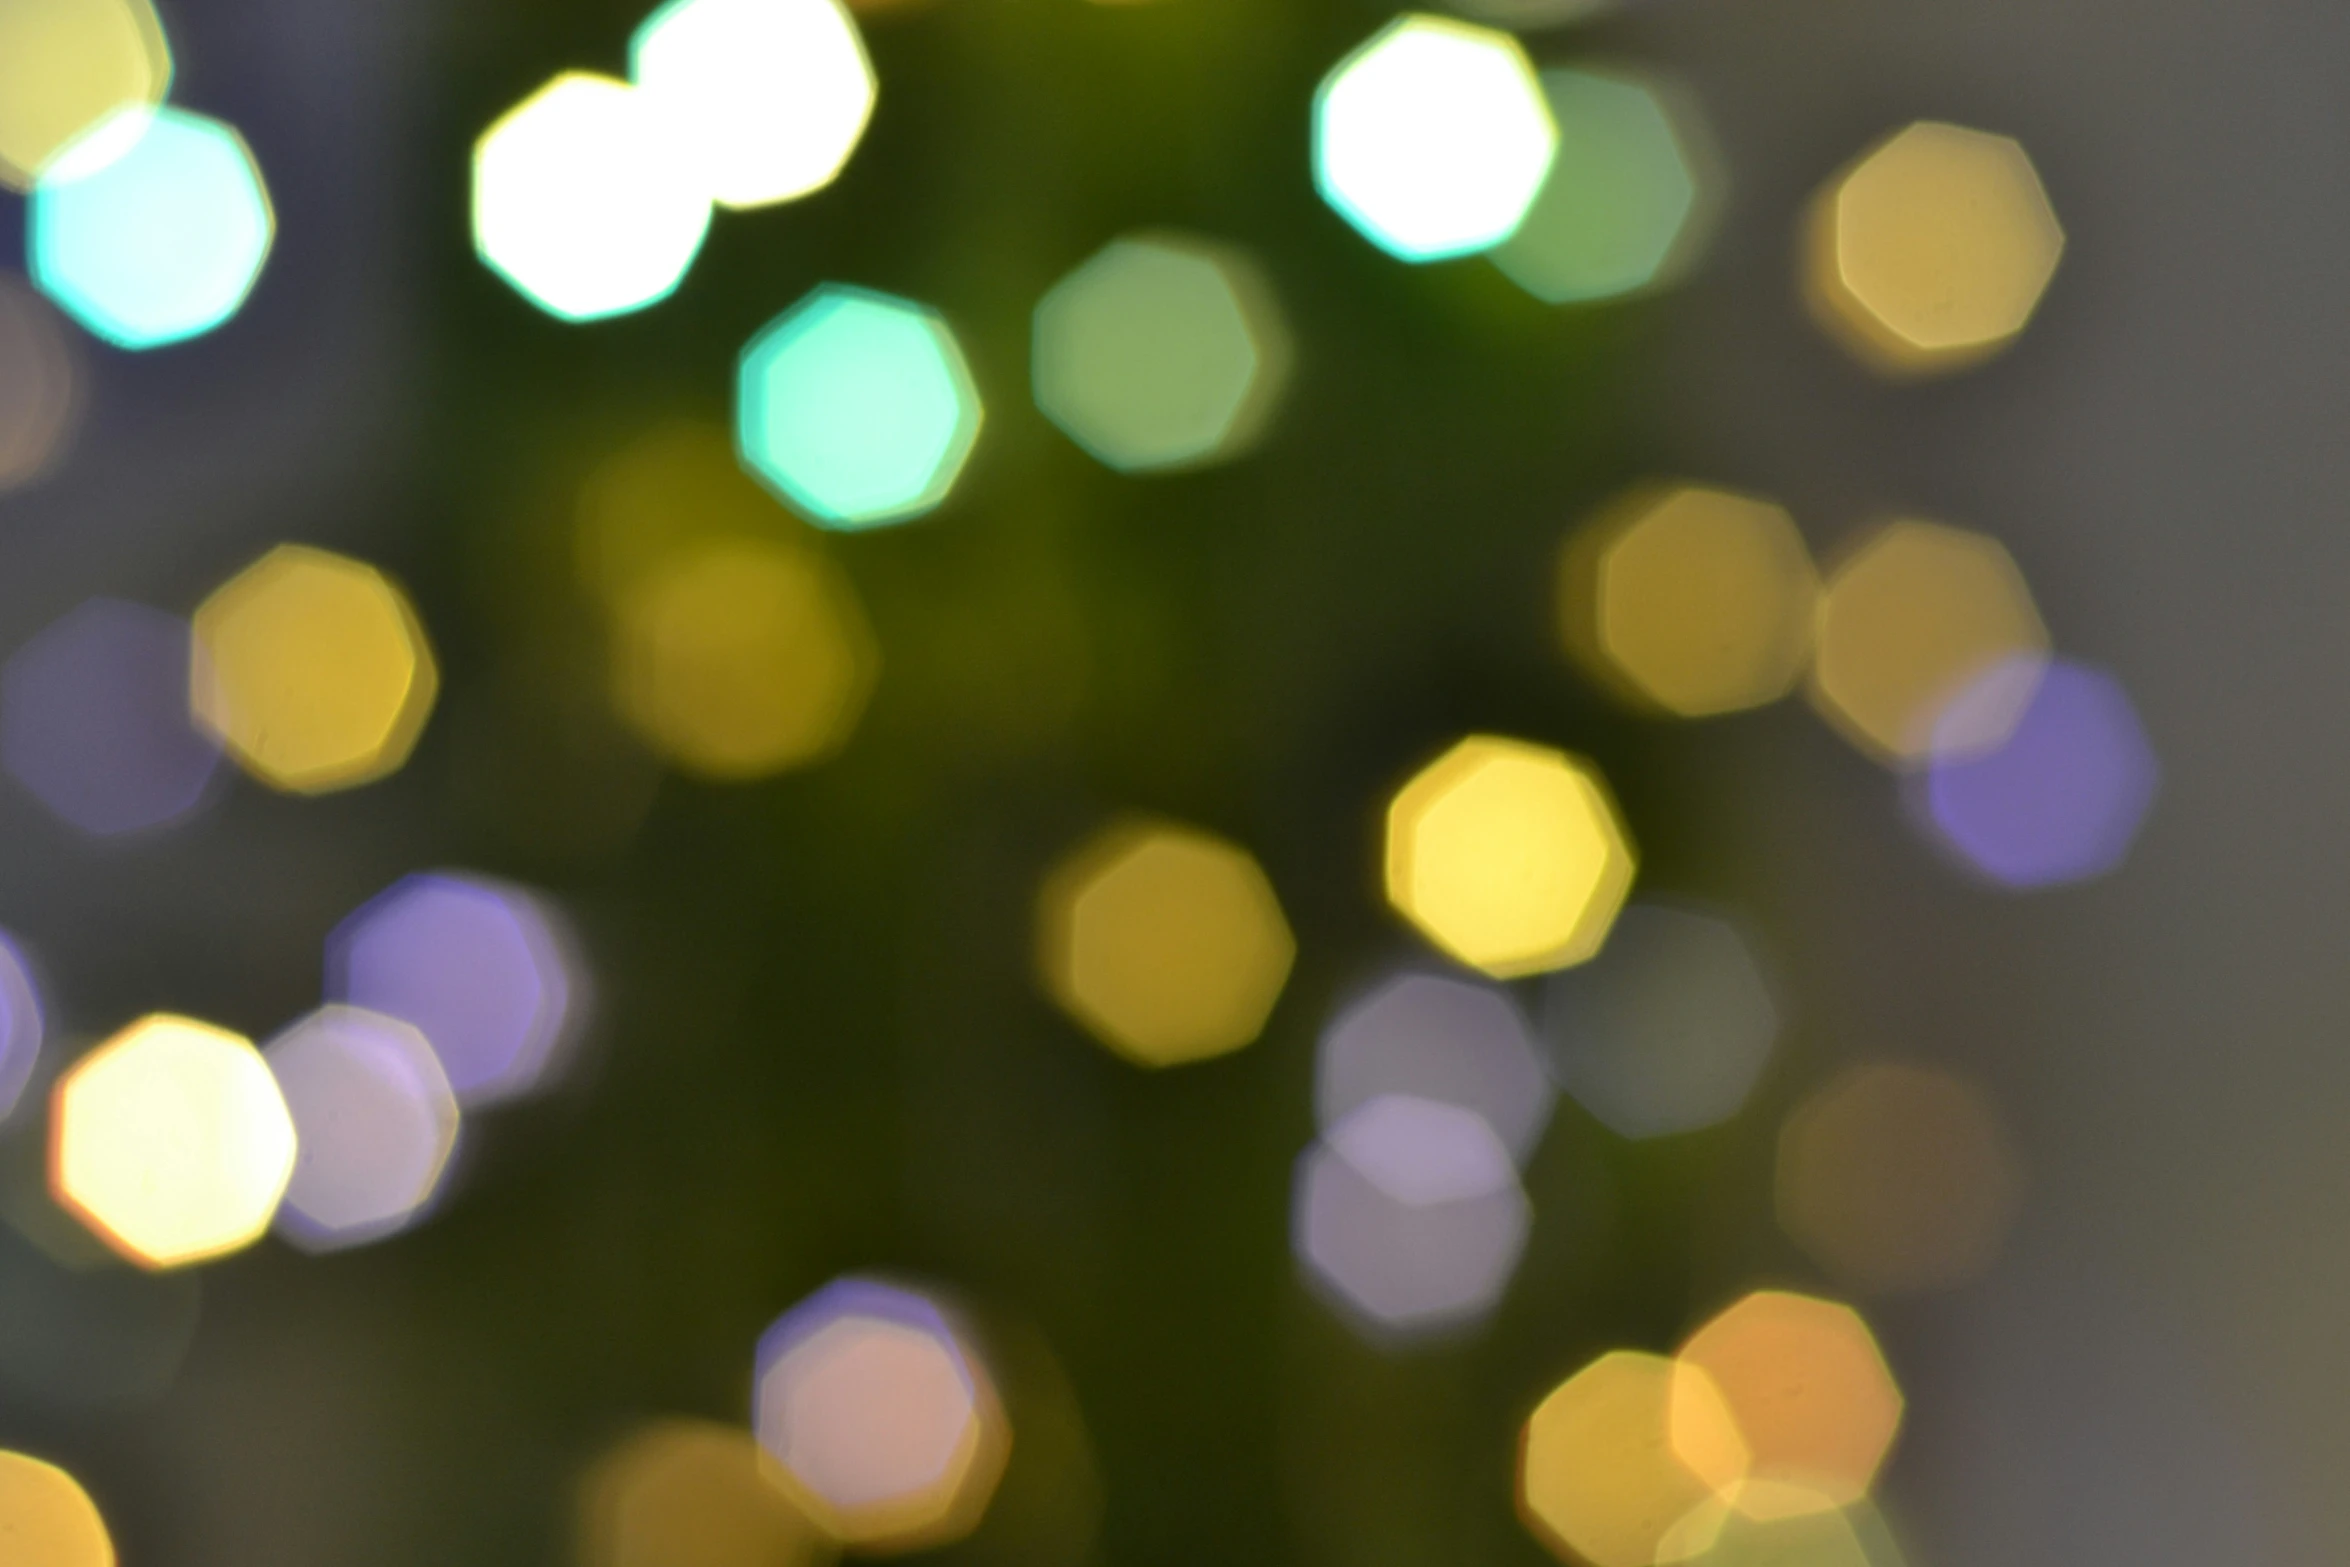 blurry image of an abstract christmas tree